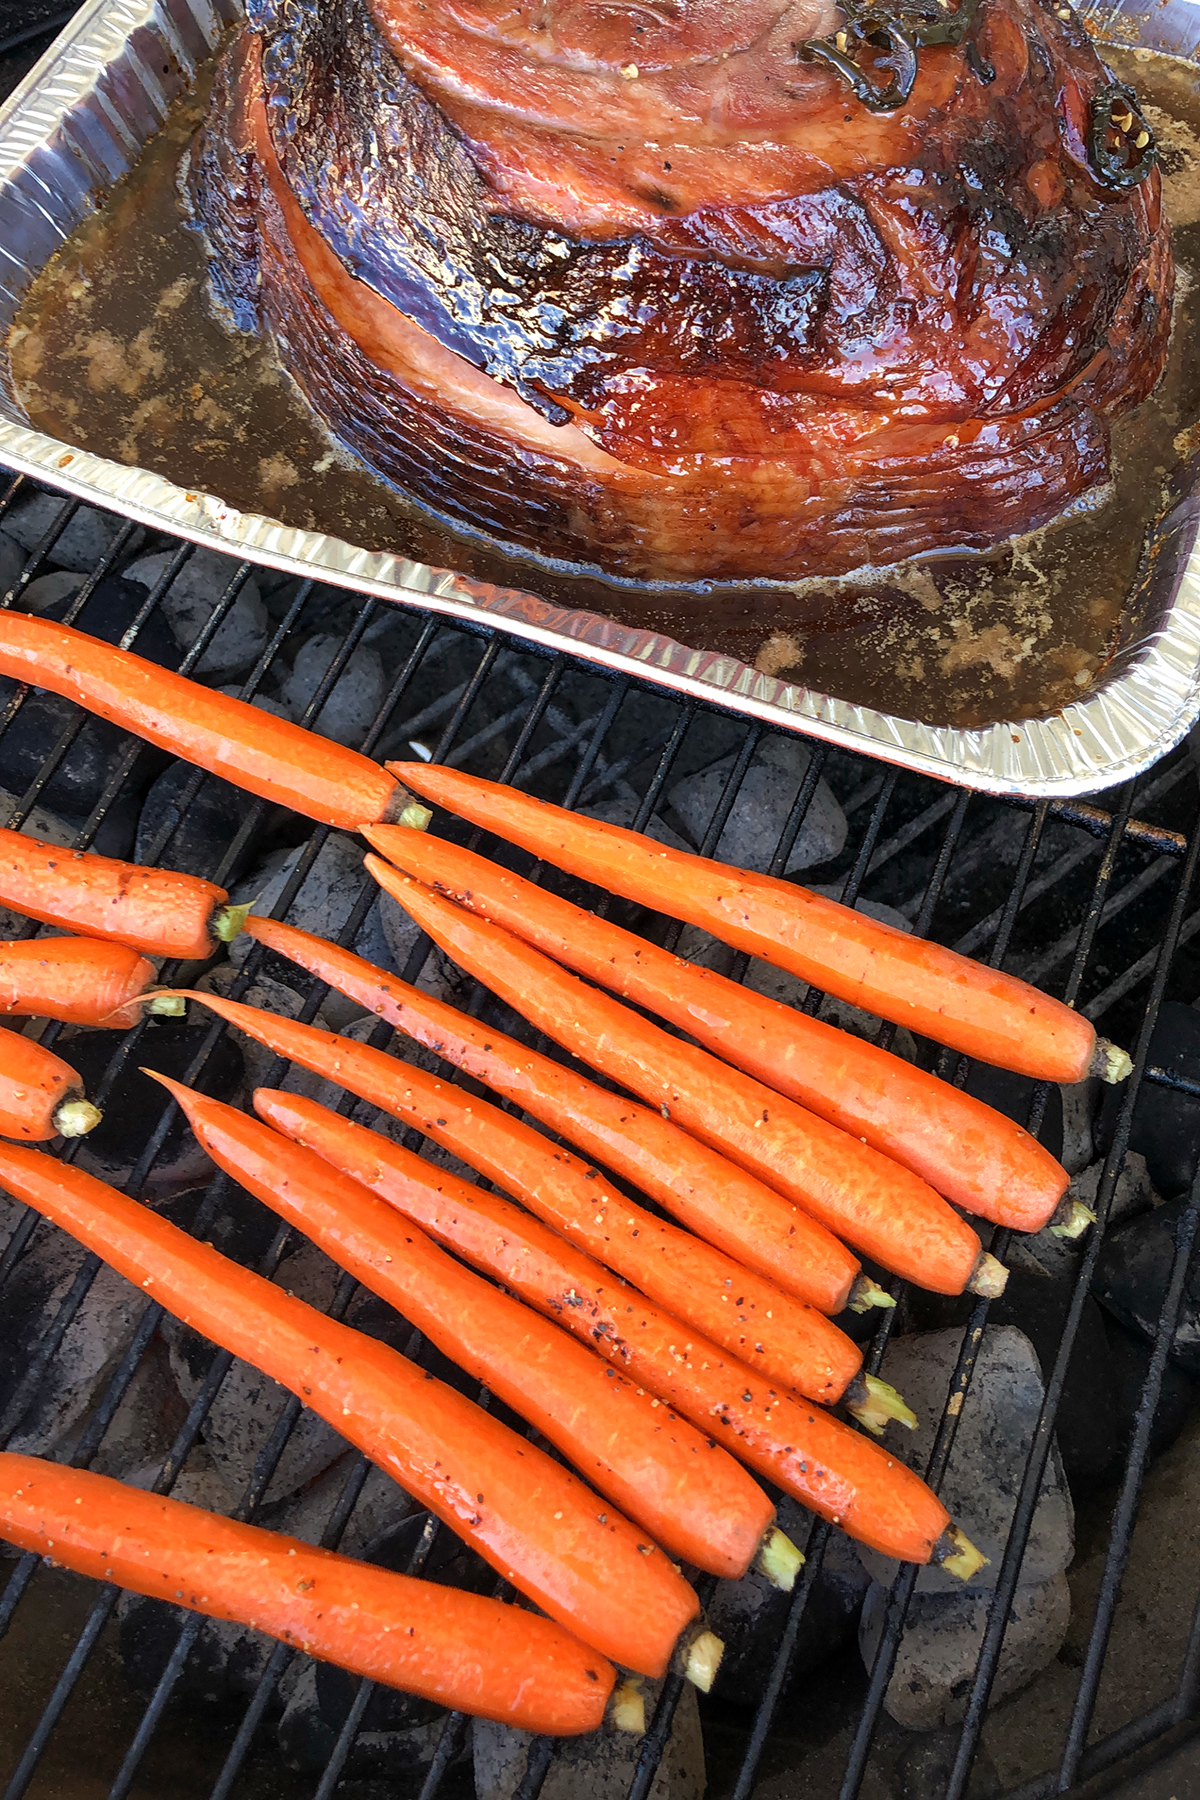 Carrots on grill next to ham.